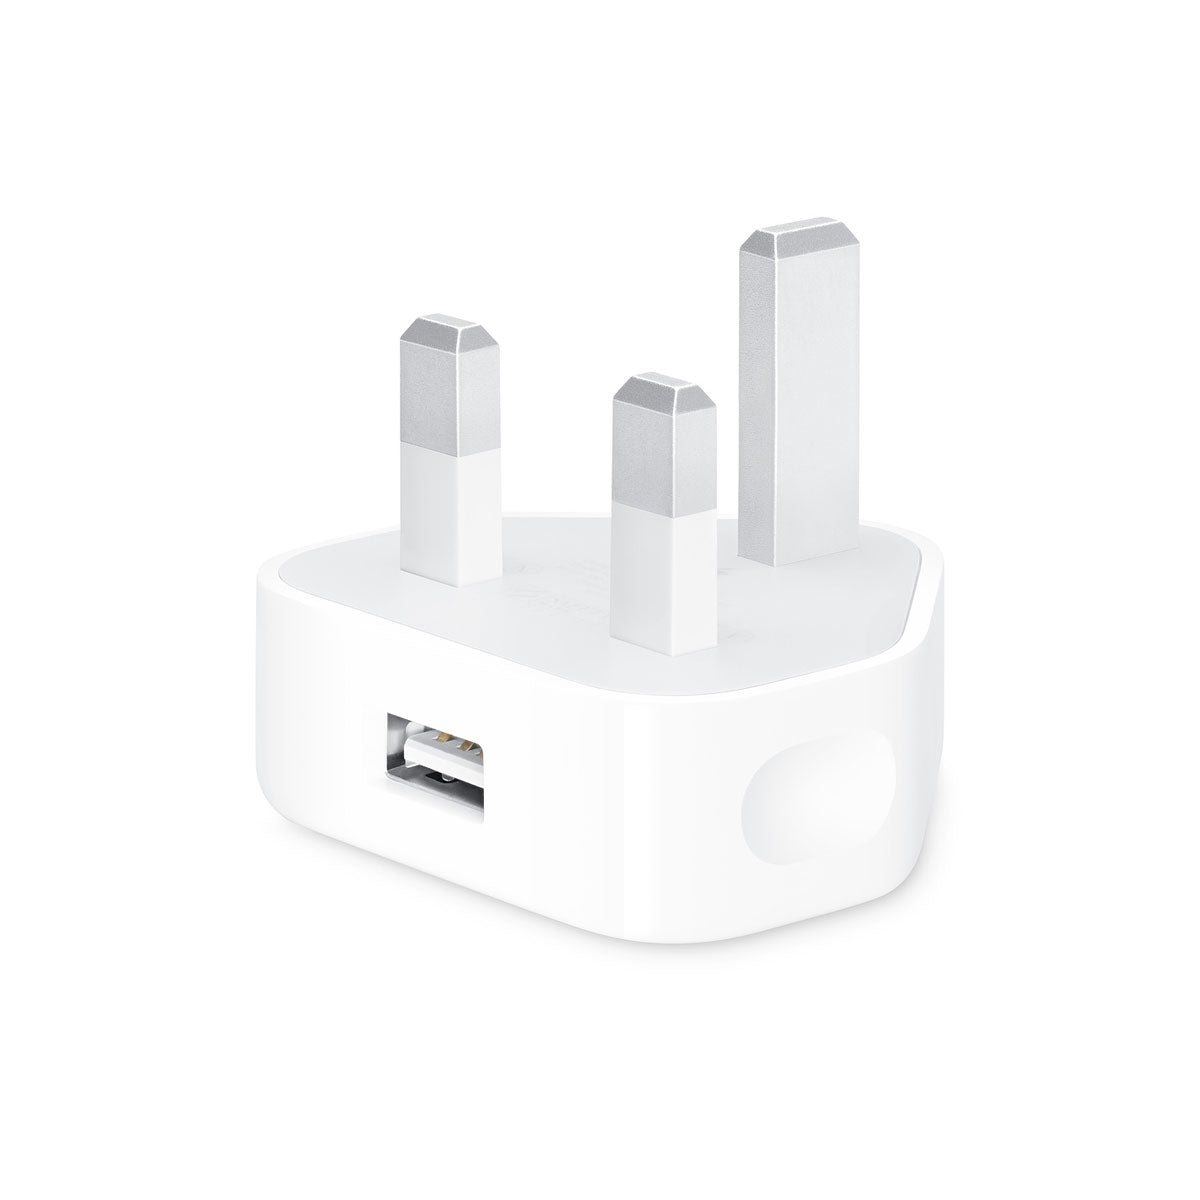 Buy Apple USB Power Adapter at Best Prices only at Starlink Tech - Oman | Link to Technology